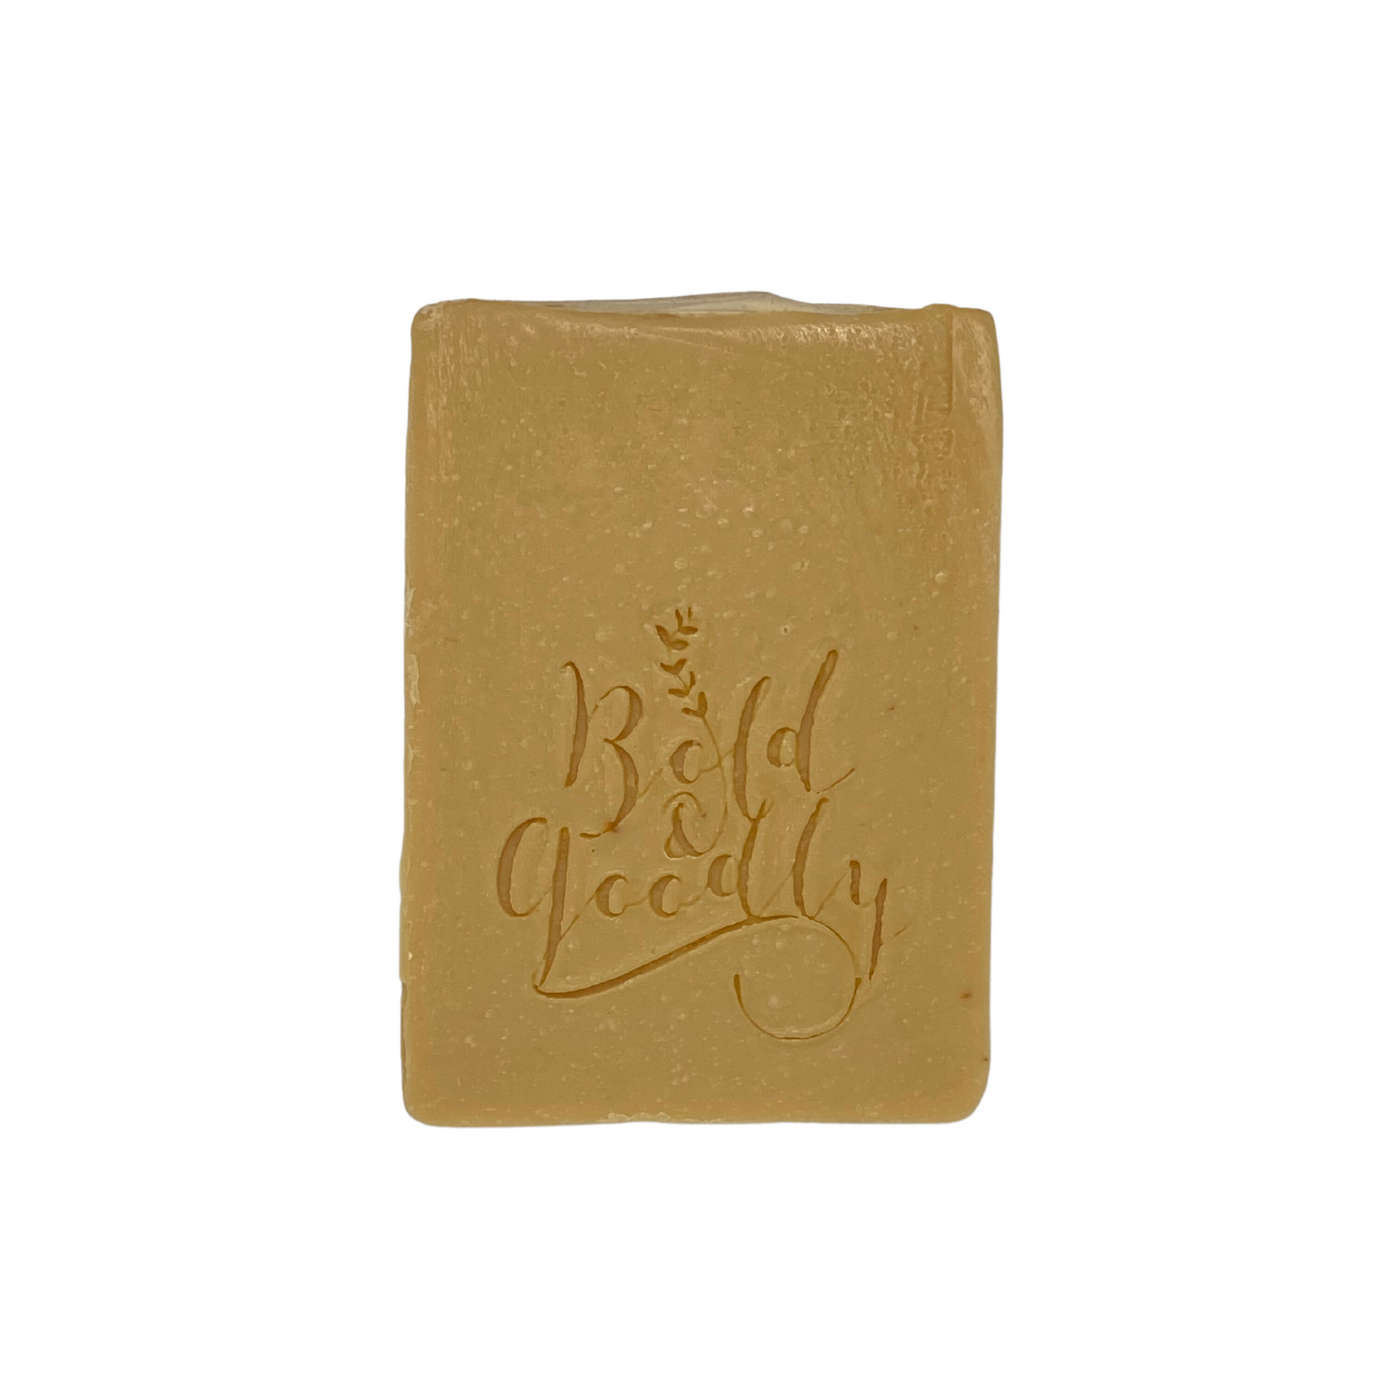 ROSEHIP-C GLOW SOAP - Bold&Goodly